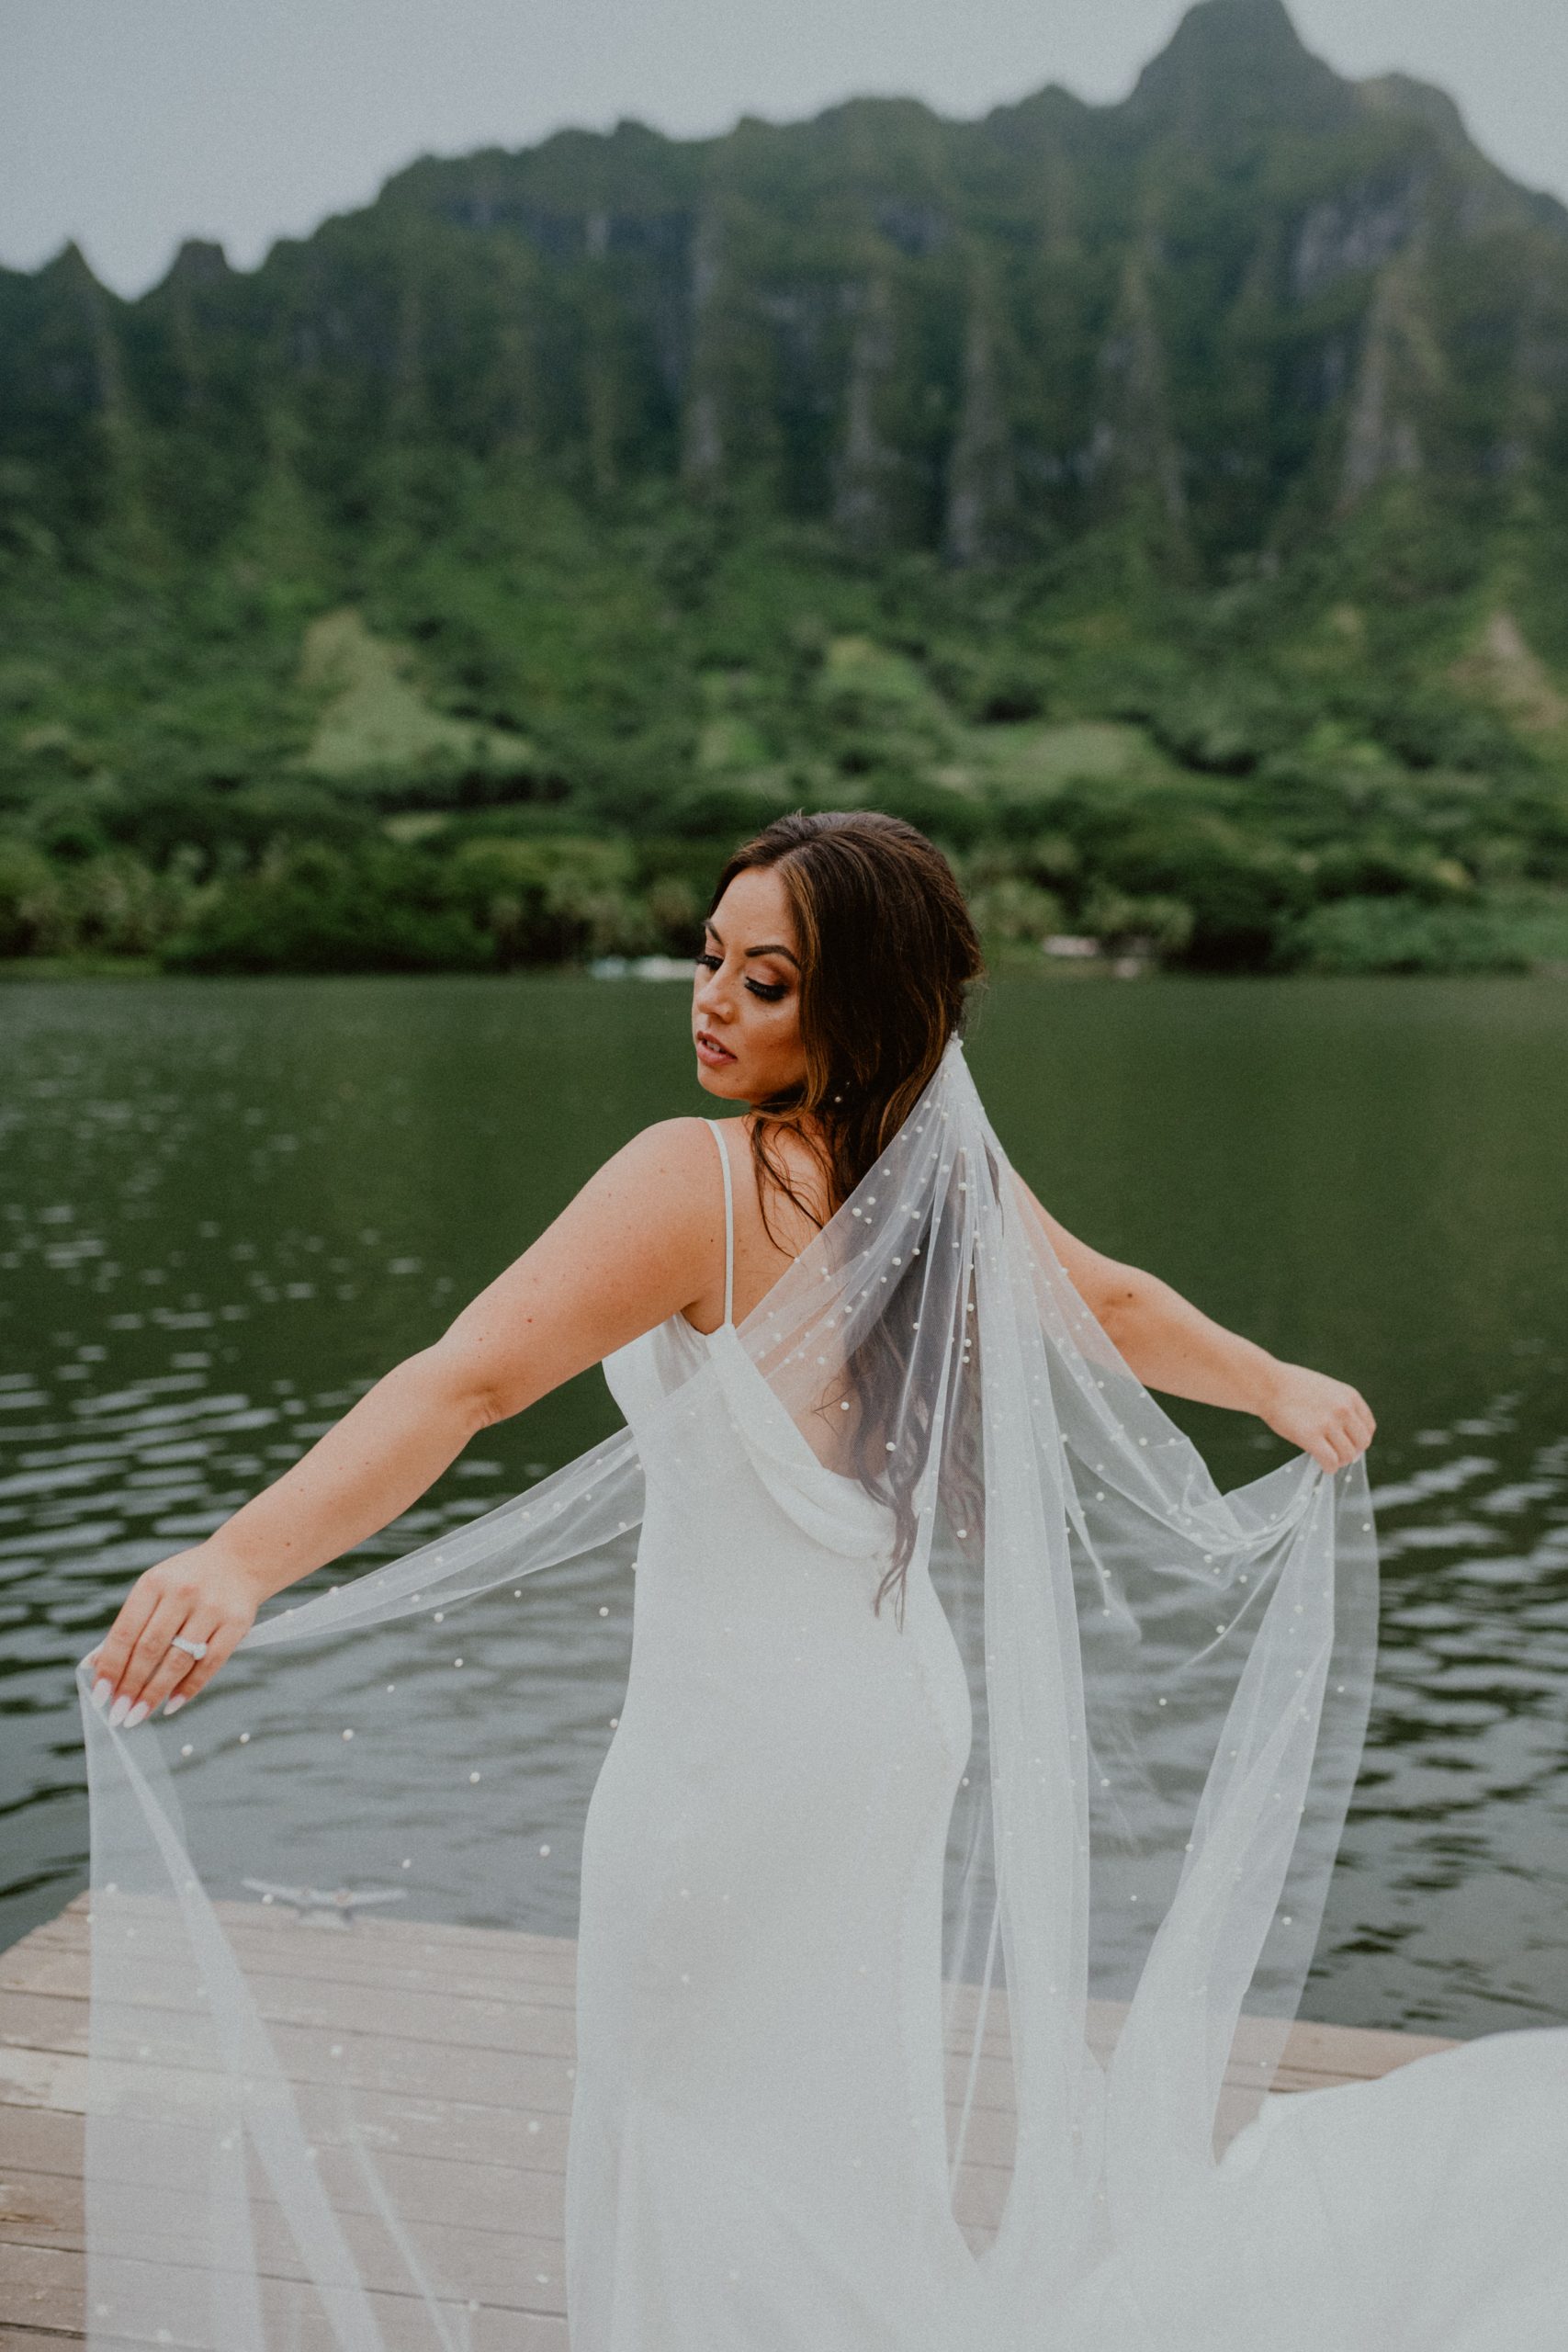 Bride holds out her long veil on the dock of the Kualoa Ranch in Oahu while staring out while wearing her white silk bridal dress | Oahu Wedding Photographer, Oahu Elopement Photographer, Destination Wedding Photographer, Destination Elopement Photographer, Newlywed moments ideas, Newlywed Photography inspiration, Hawaii Elopement ideas | chelseaabril.com